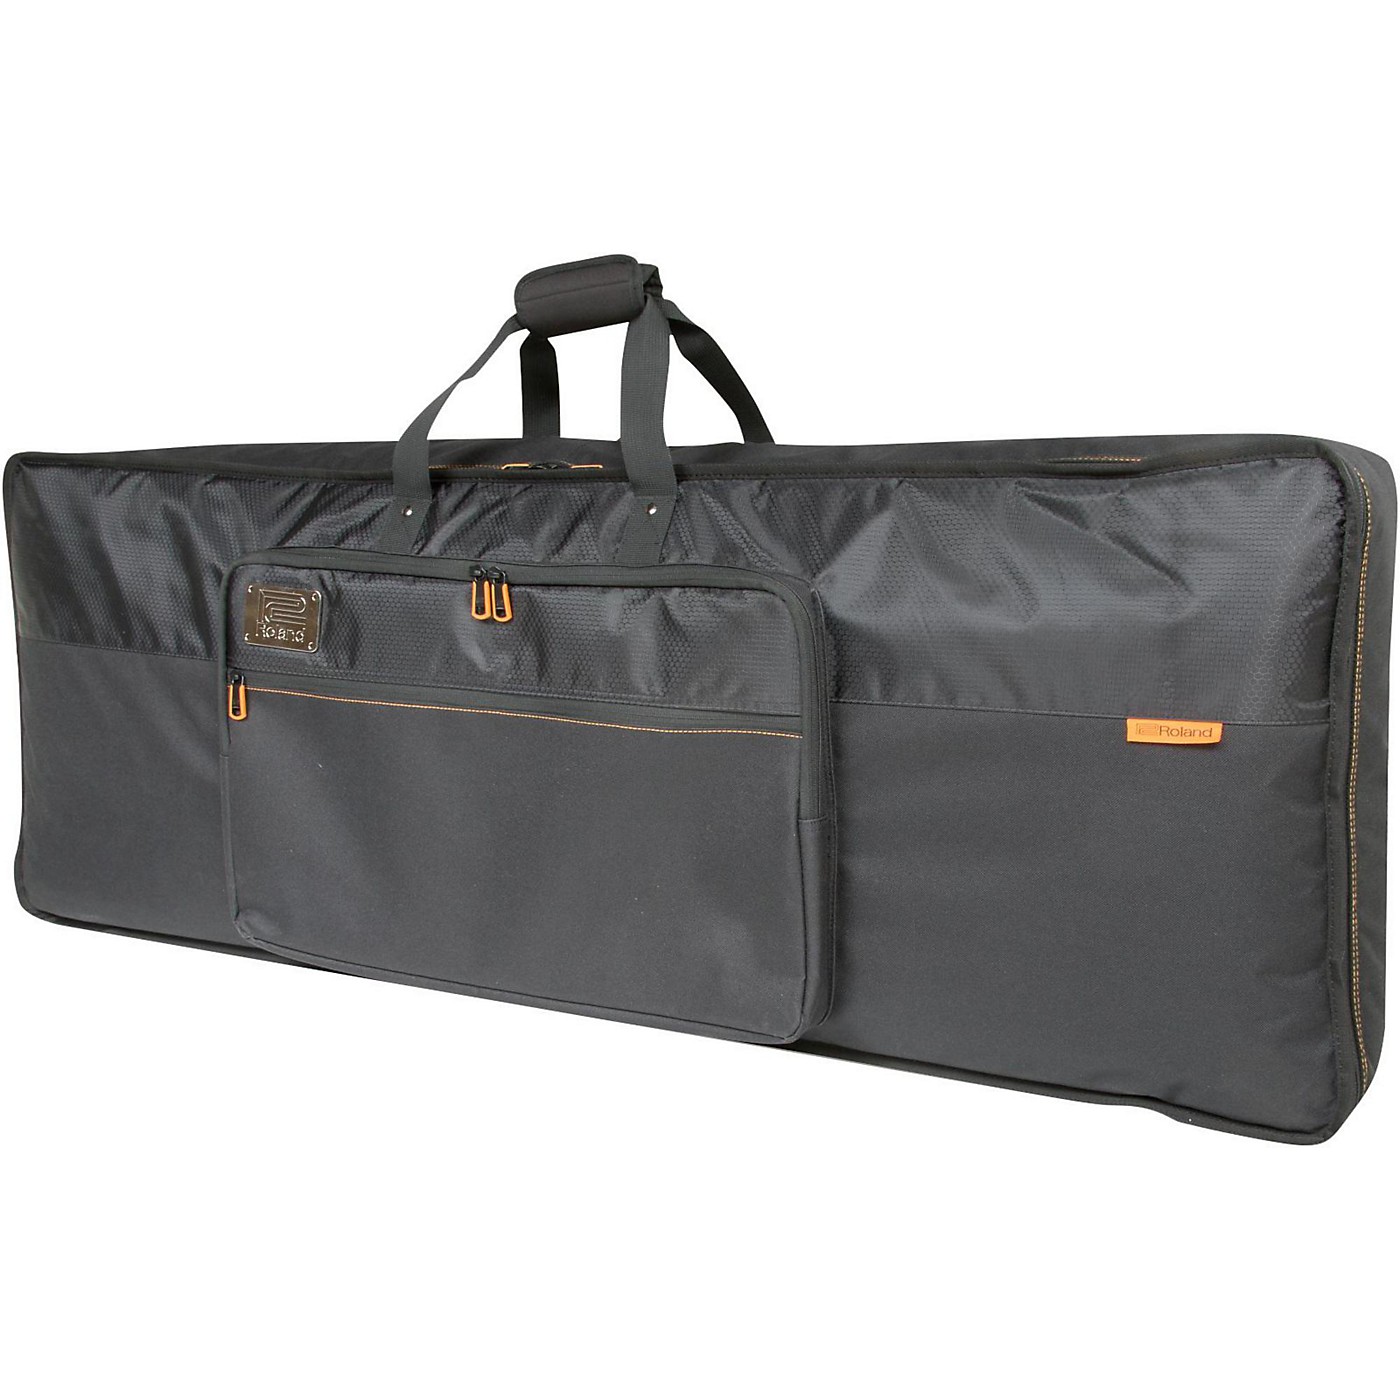 Roland Black Series Keyboard Bag with Backpack Straps thumbnail